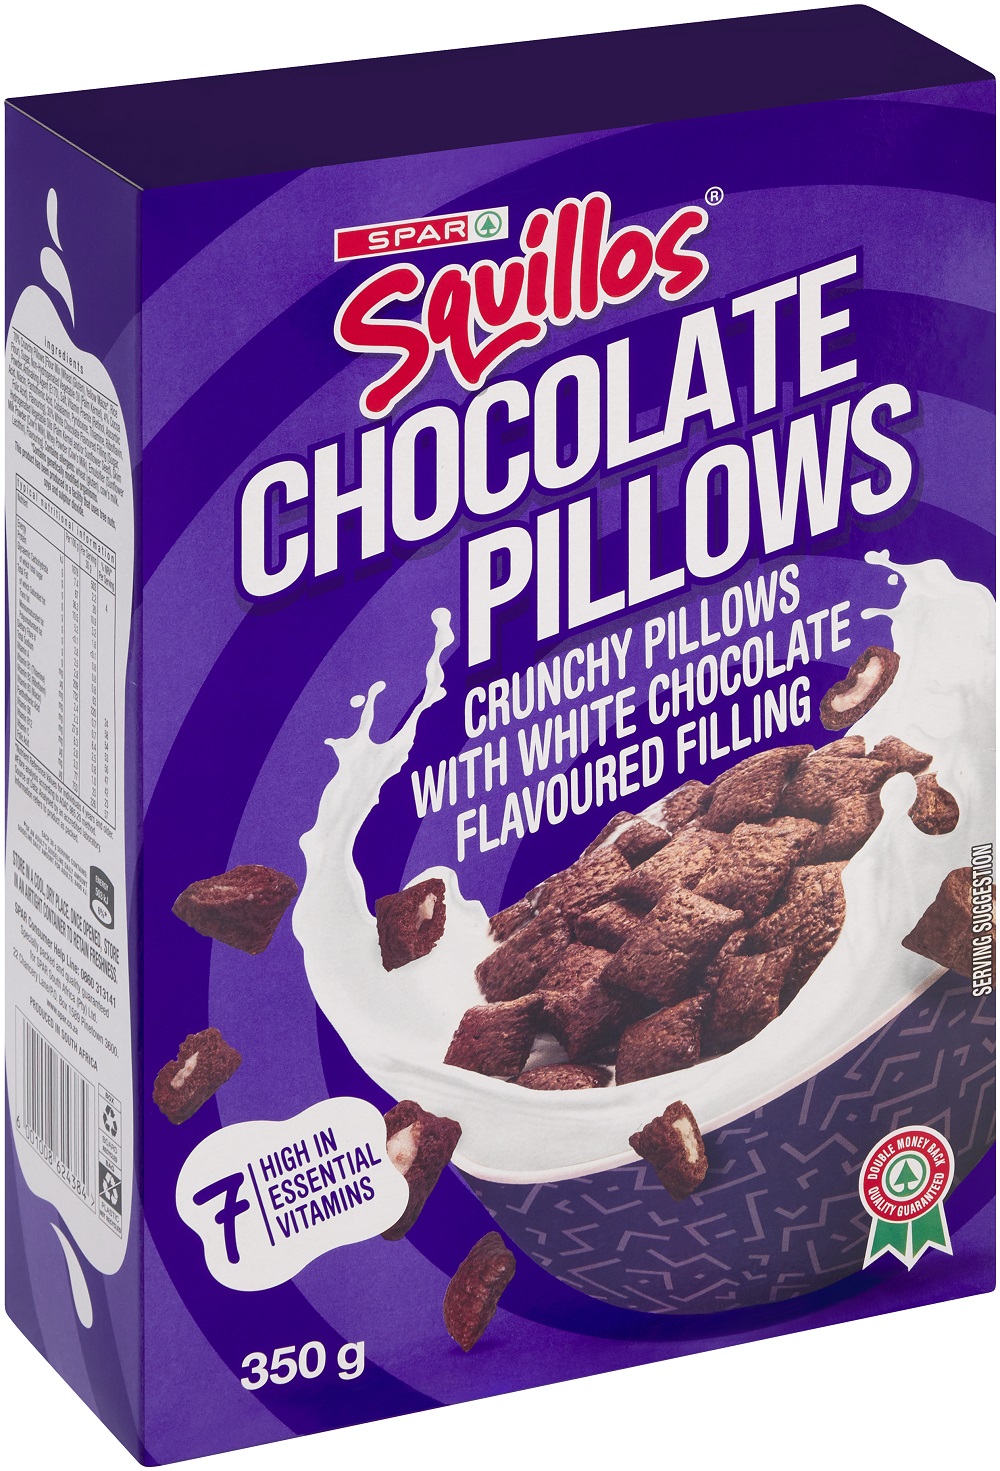 squillos chocolate pillows